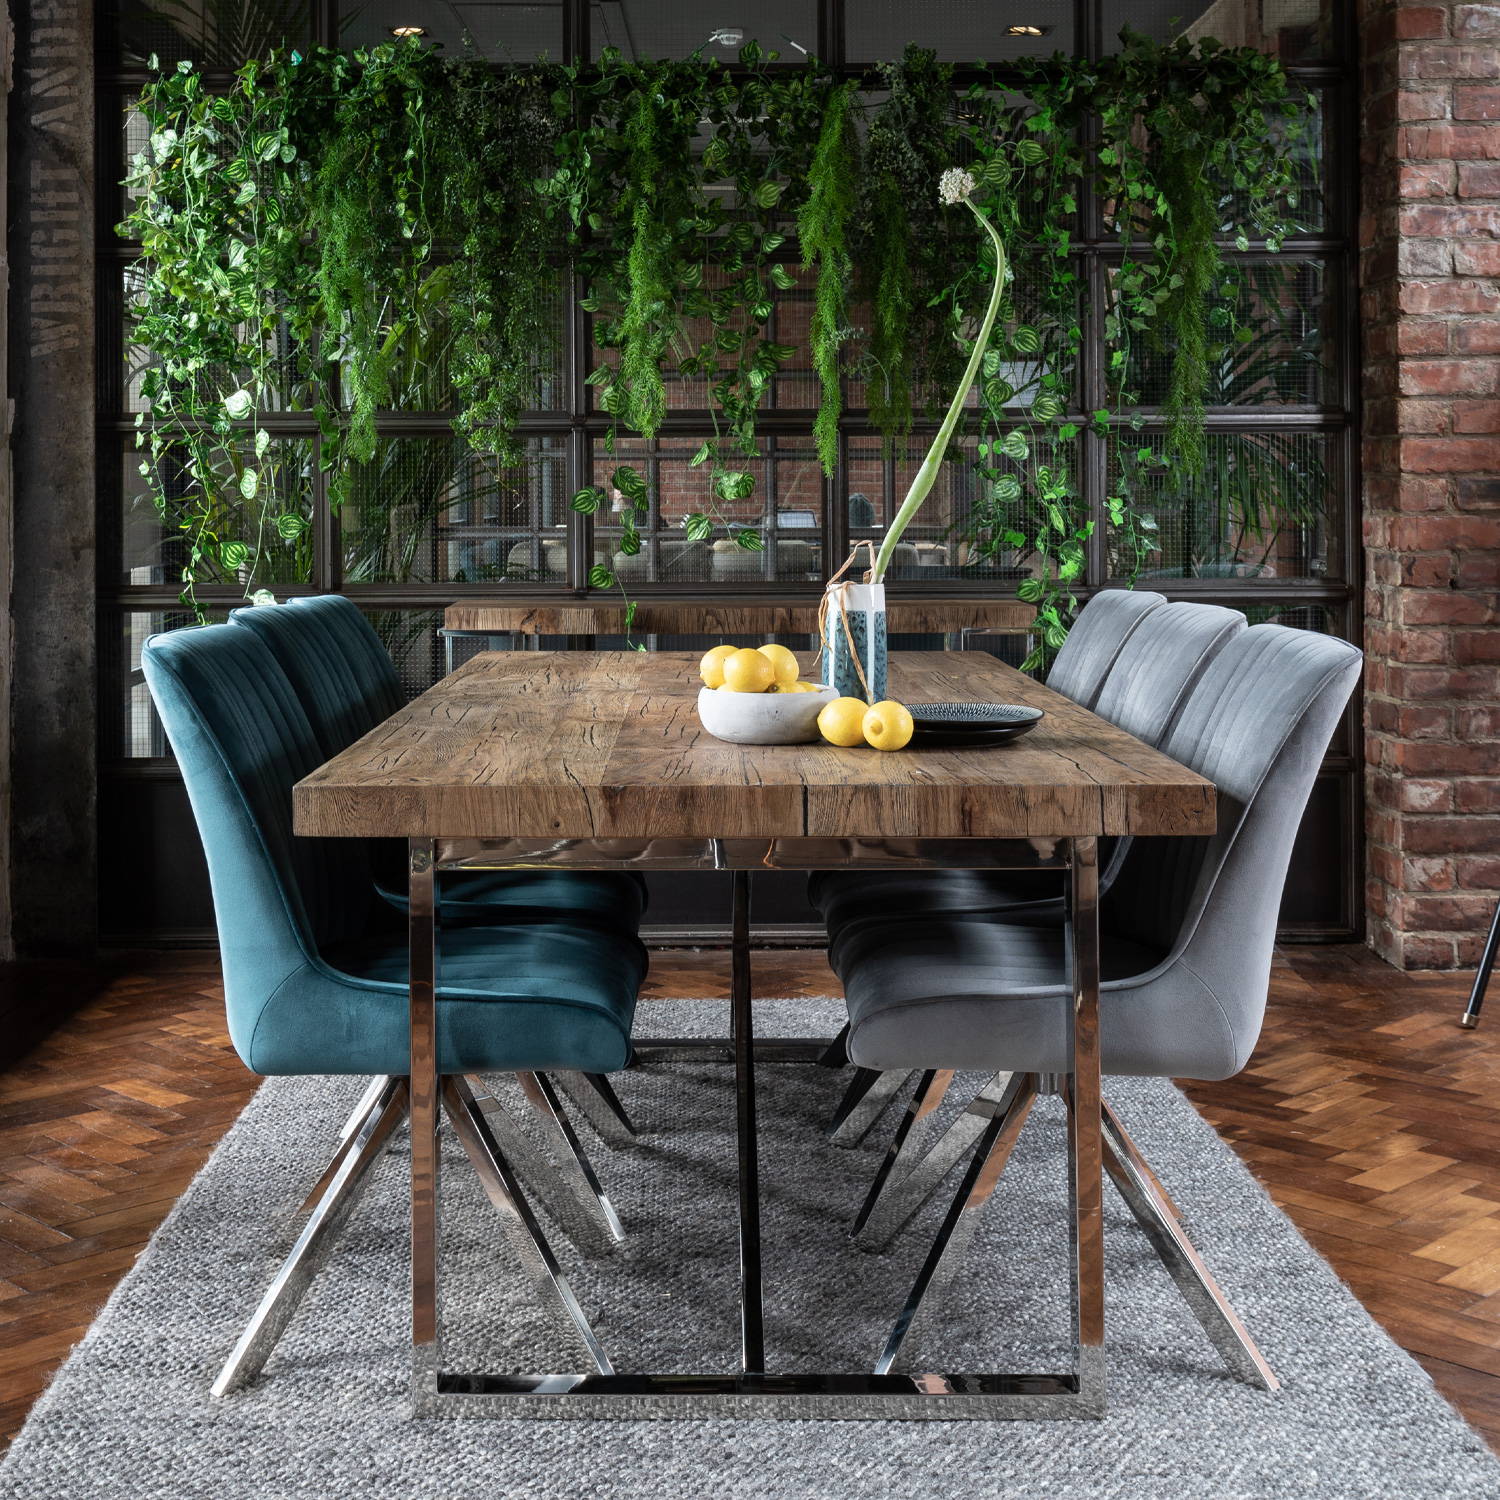 Primrose Hill Dining Furniture At BF Home